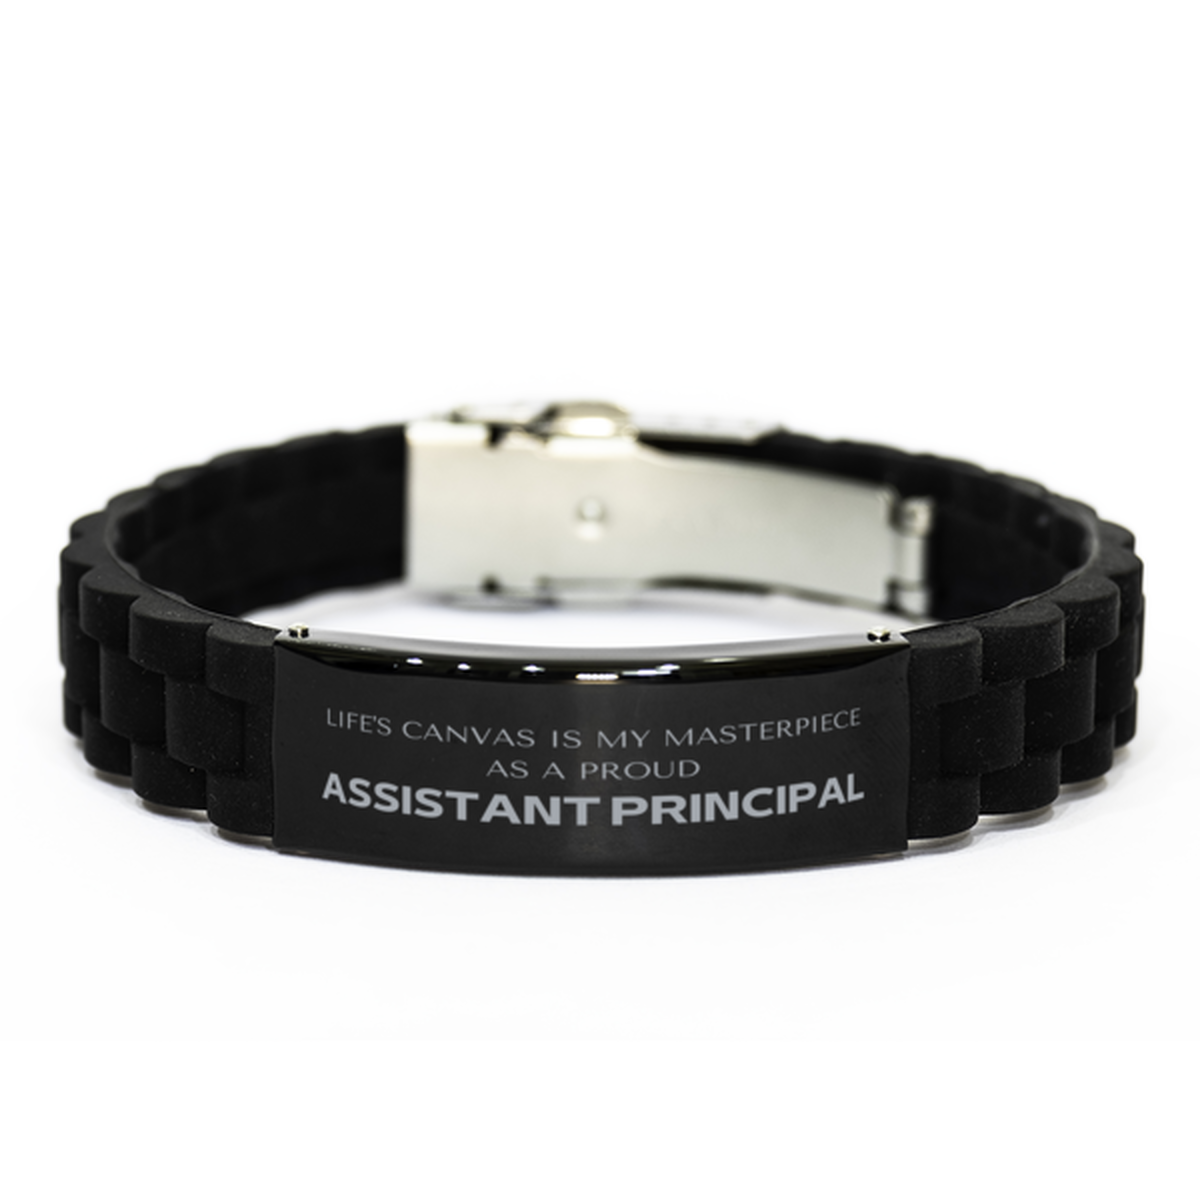 Proud Assistant Principal Gifts, Life's canvas is my masterpiece, Epic Birthday Christmas Unique Black Glidelock Clasp Bracelet For Assistant Principal, Coworkers, Men, Women, Friends